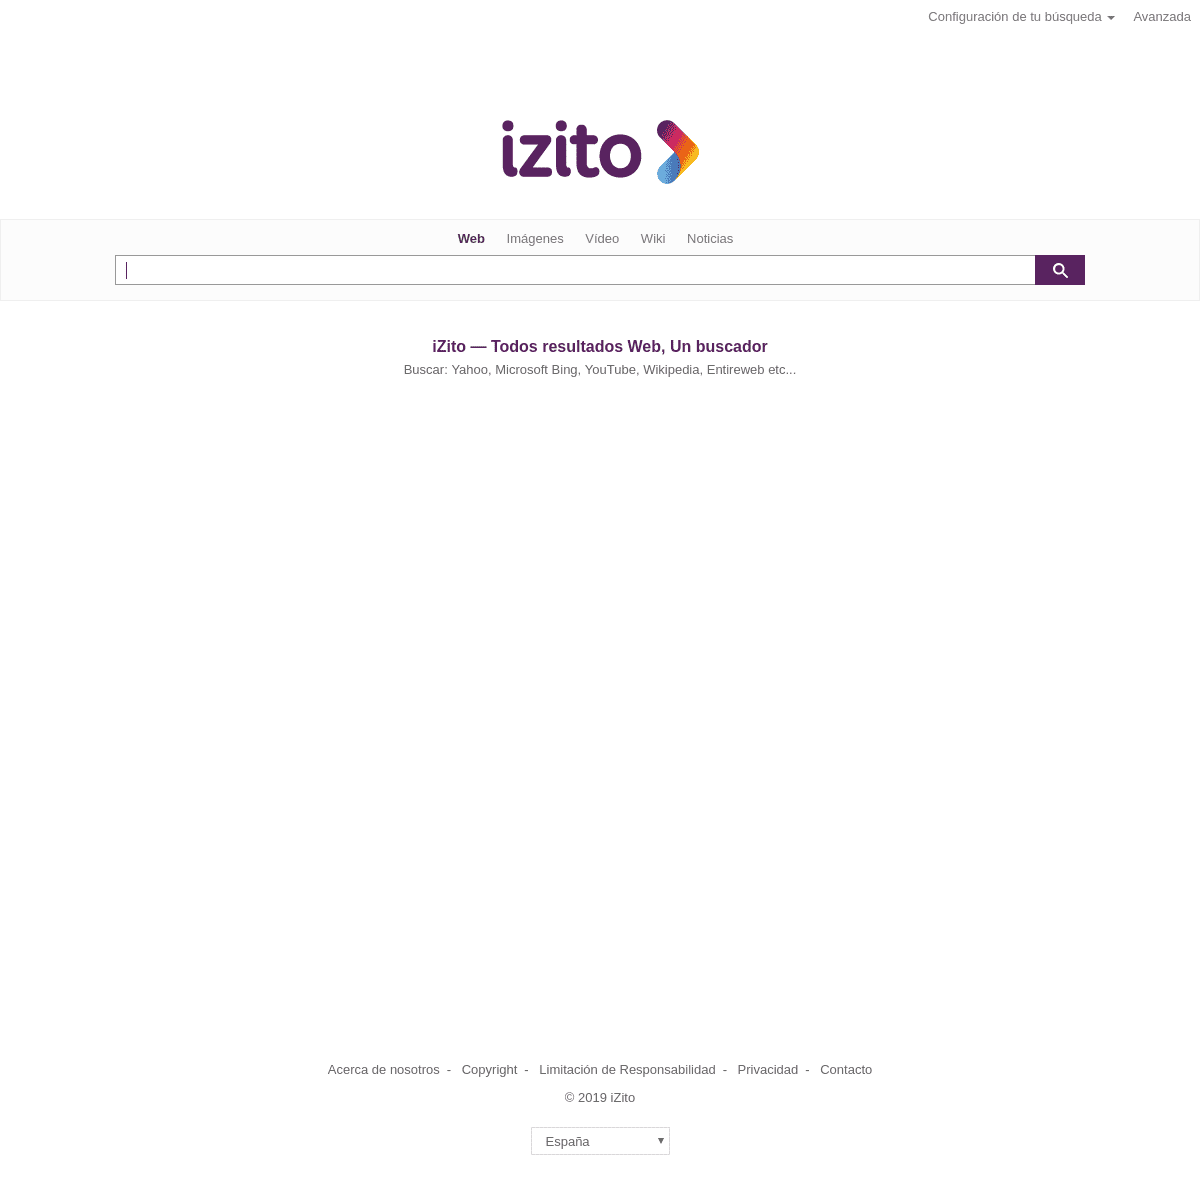 A complete backup of izito.es